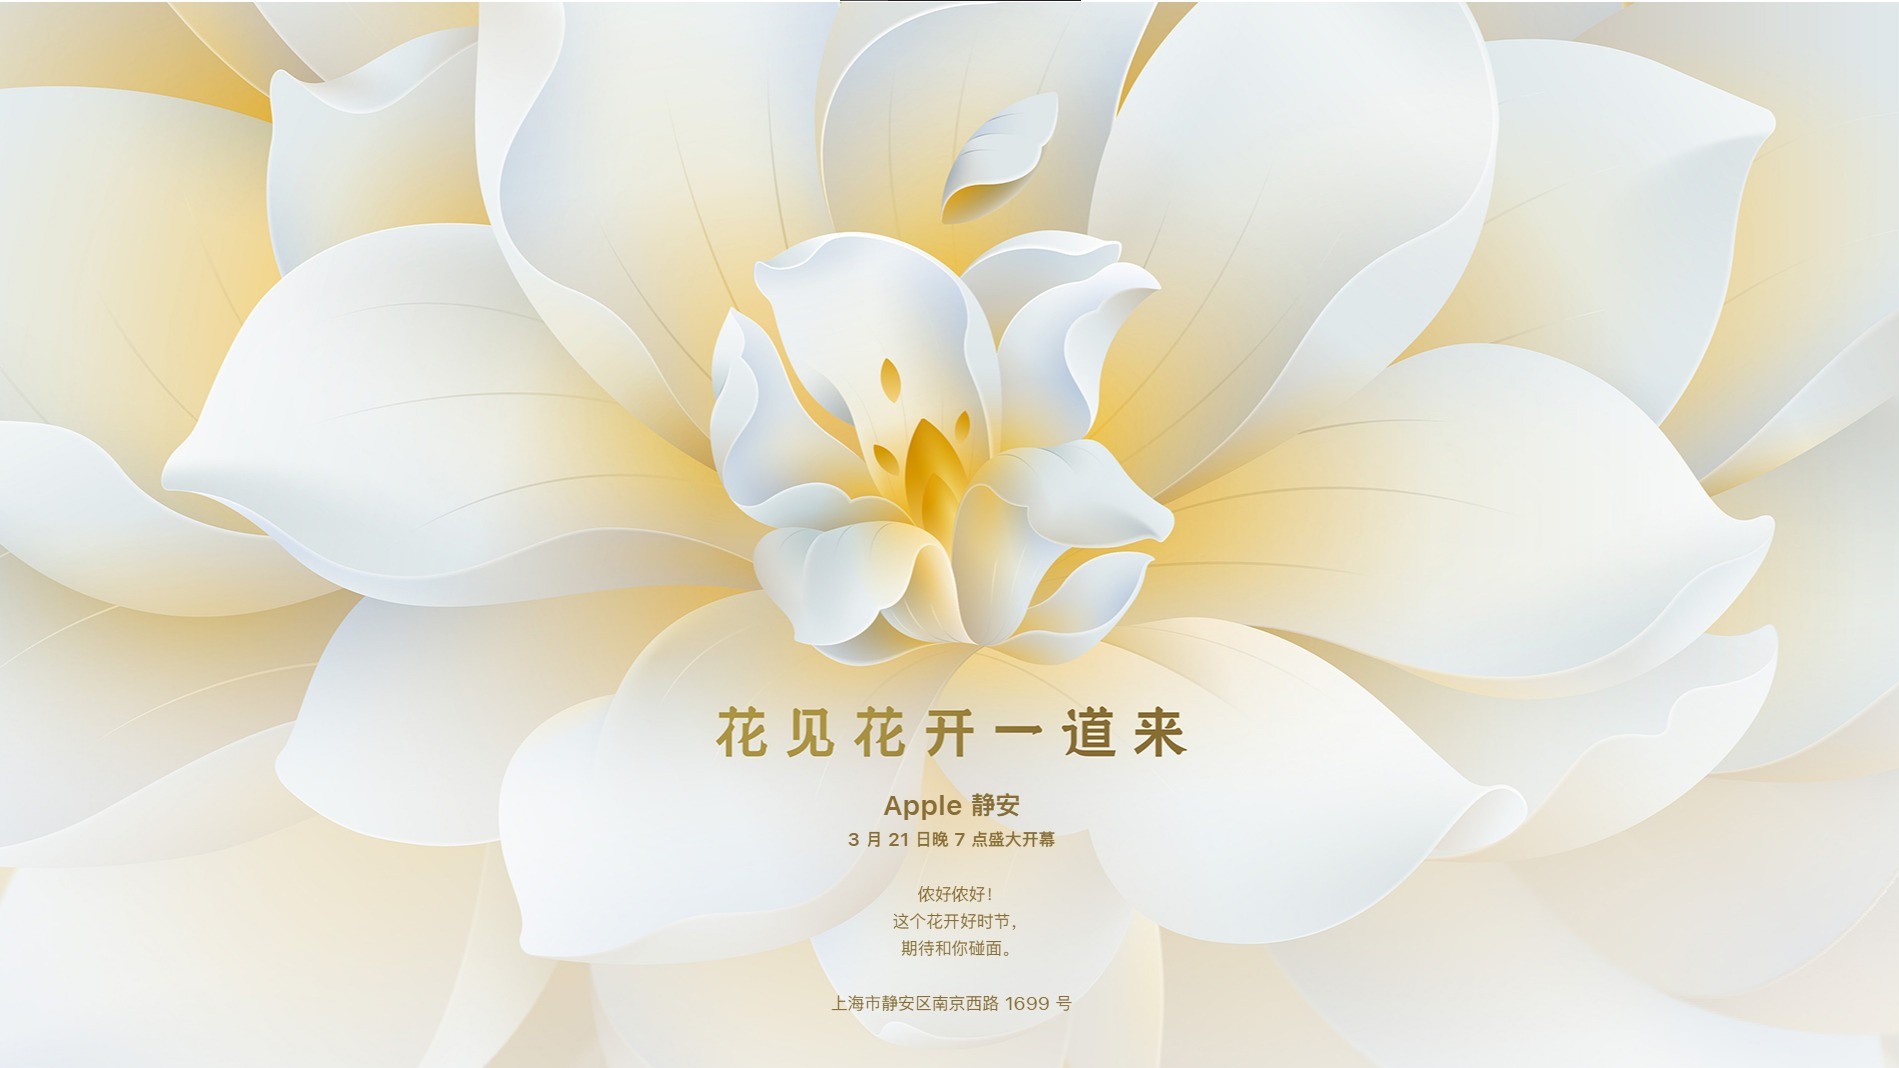  Apple's new strategy for China! Shanghai Jing'an Apple Store officially opened on March 21